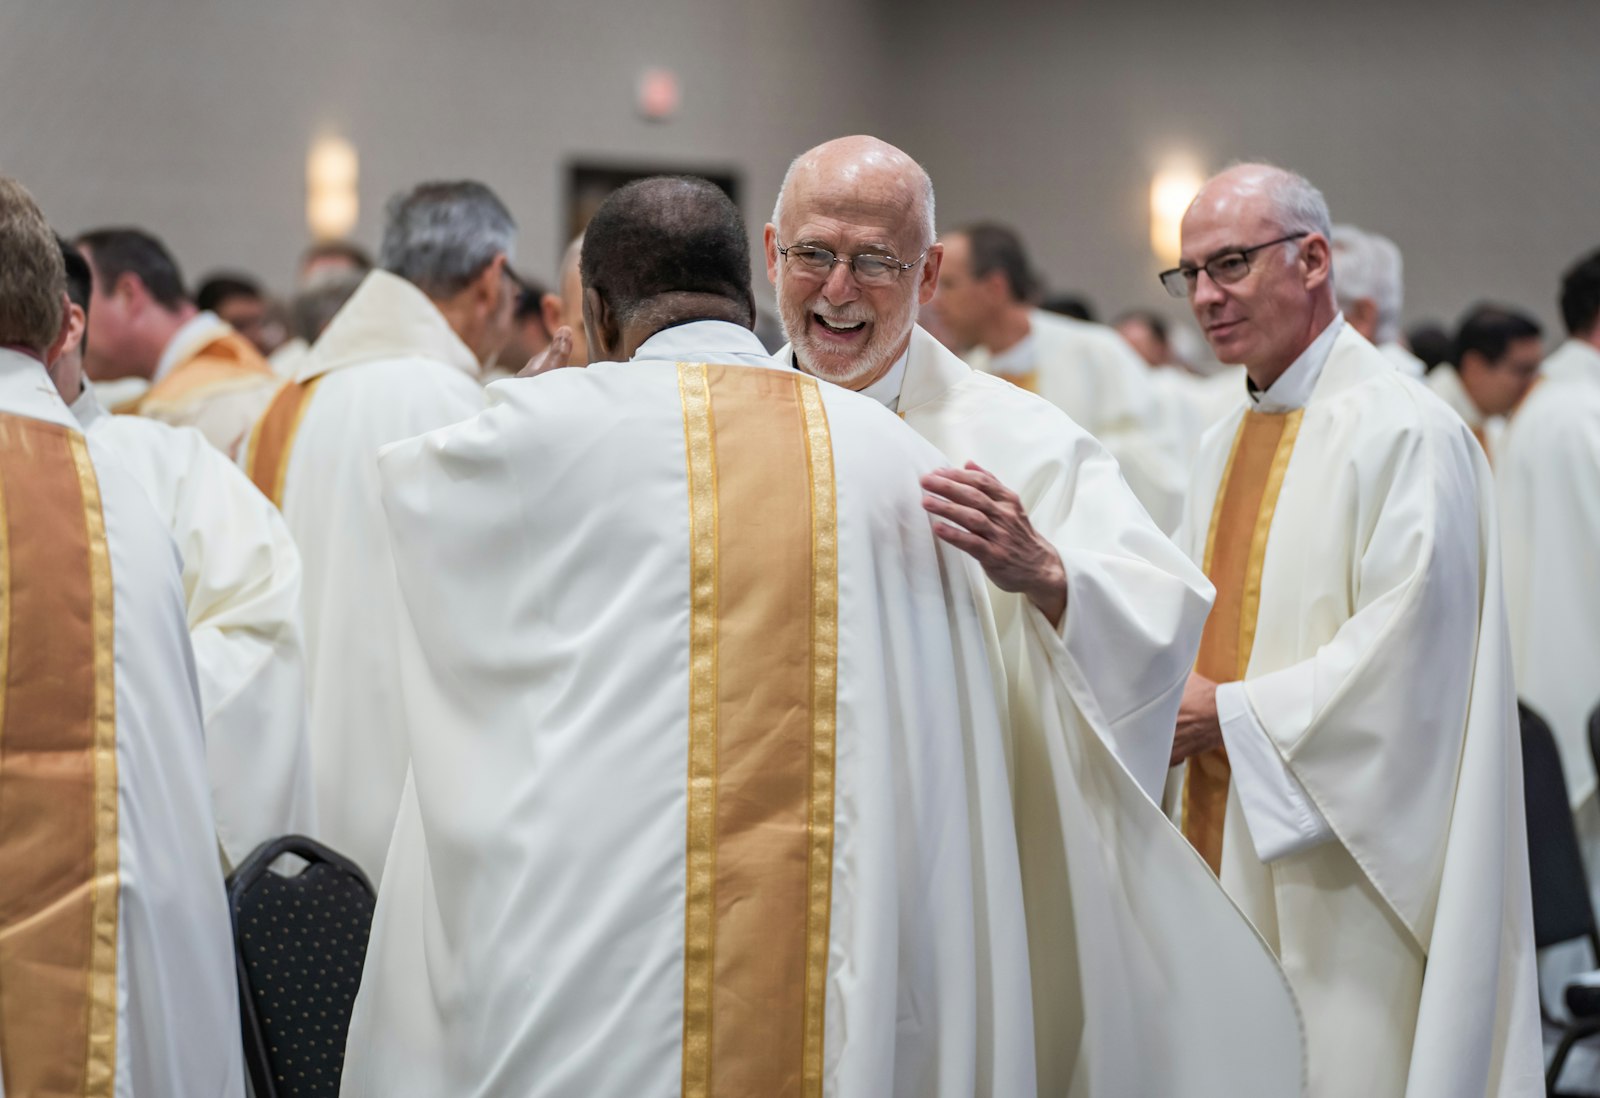 Priests of the Archdiocese of Detroit greet one another with hugs and smiles during a Mass on June 28, the second day of the Missionary Renewal Assembly at the Suburban Collection Showplace in Novi.